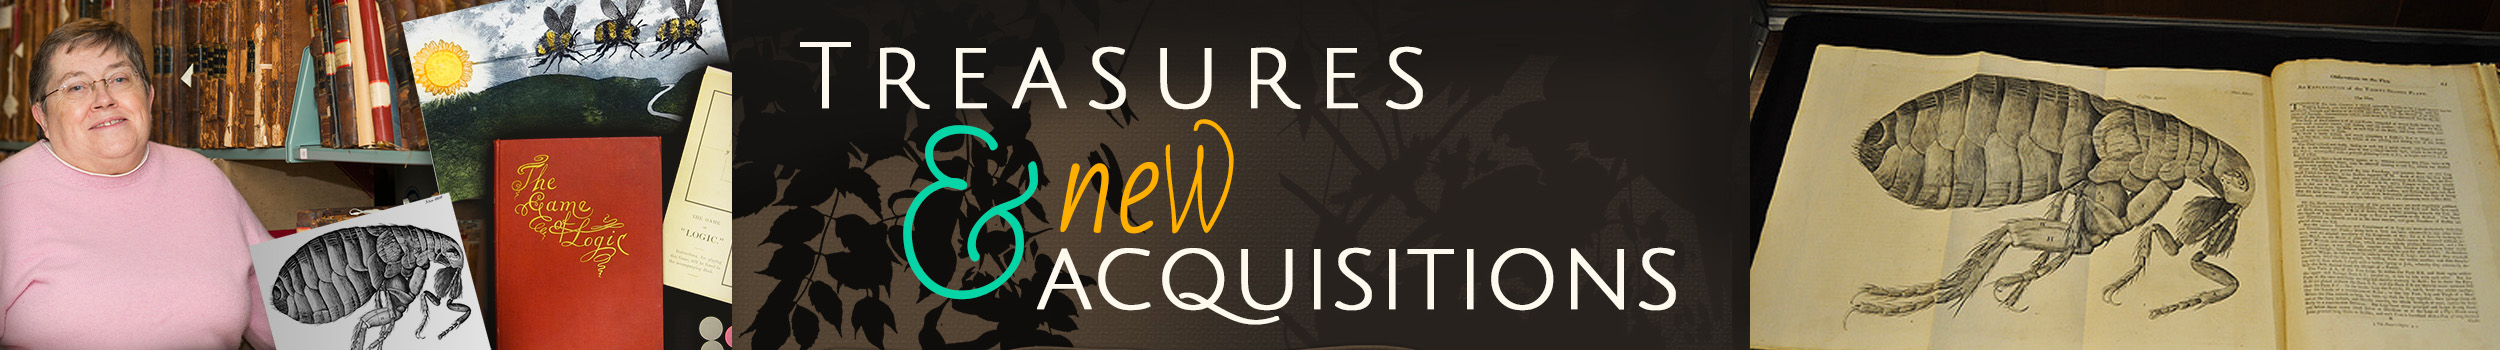 Treasures and New Acquisitions Favorites banner